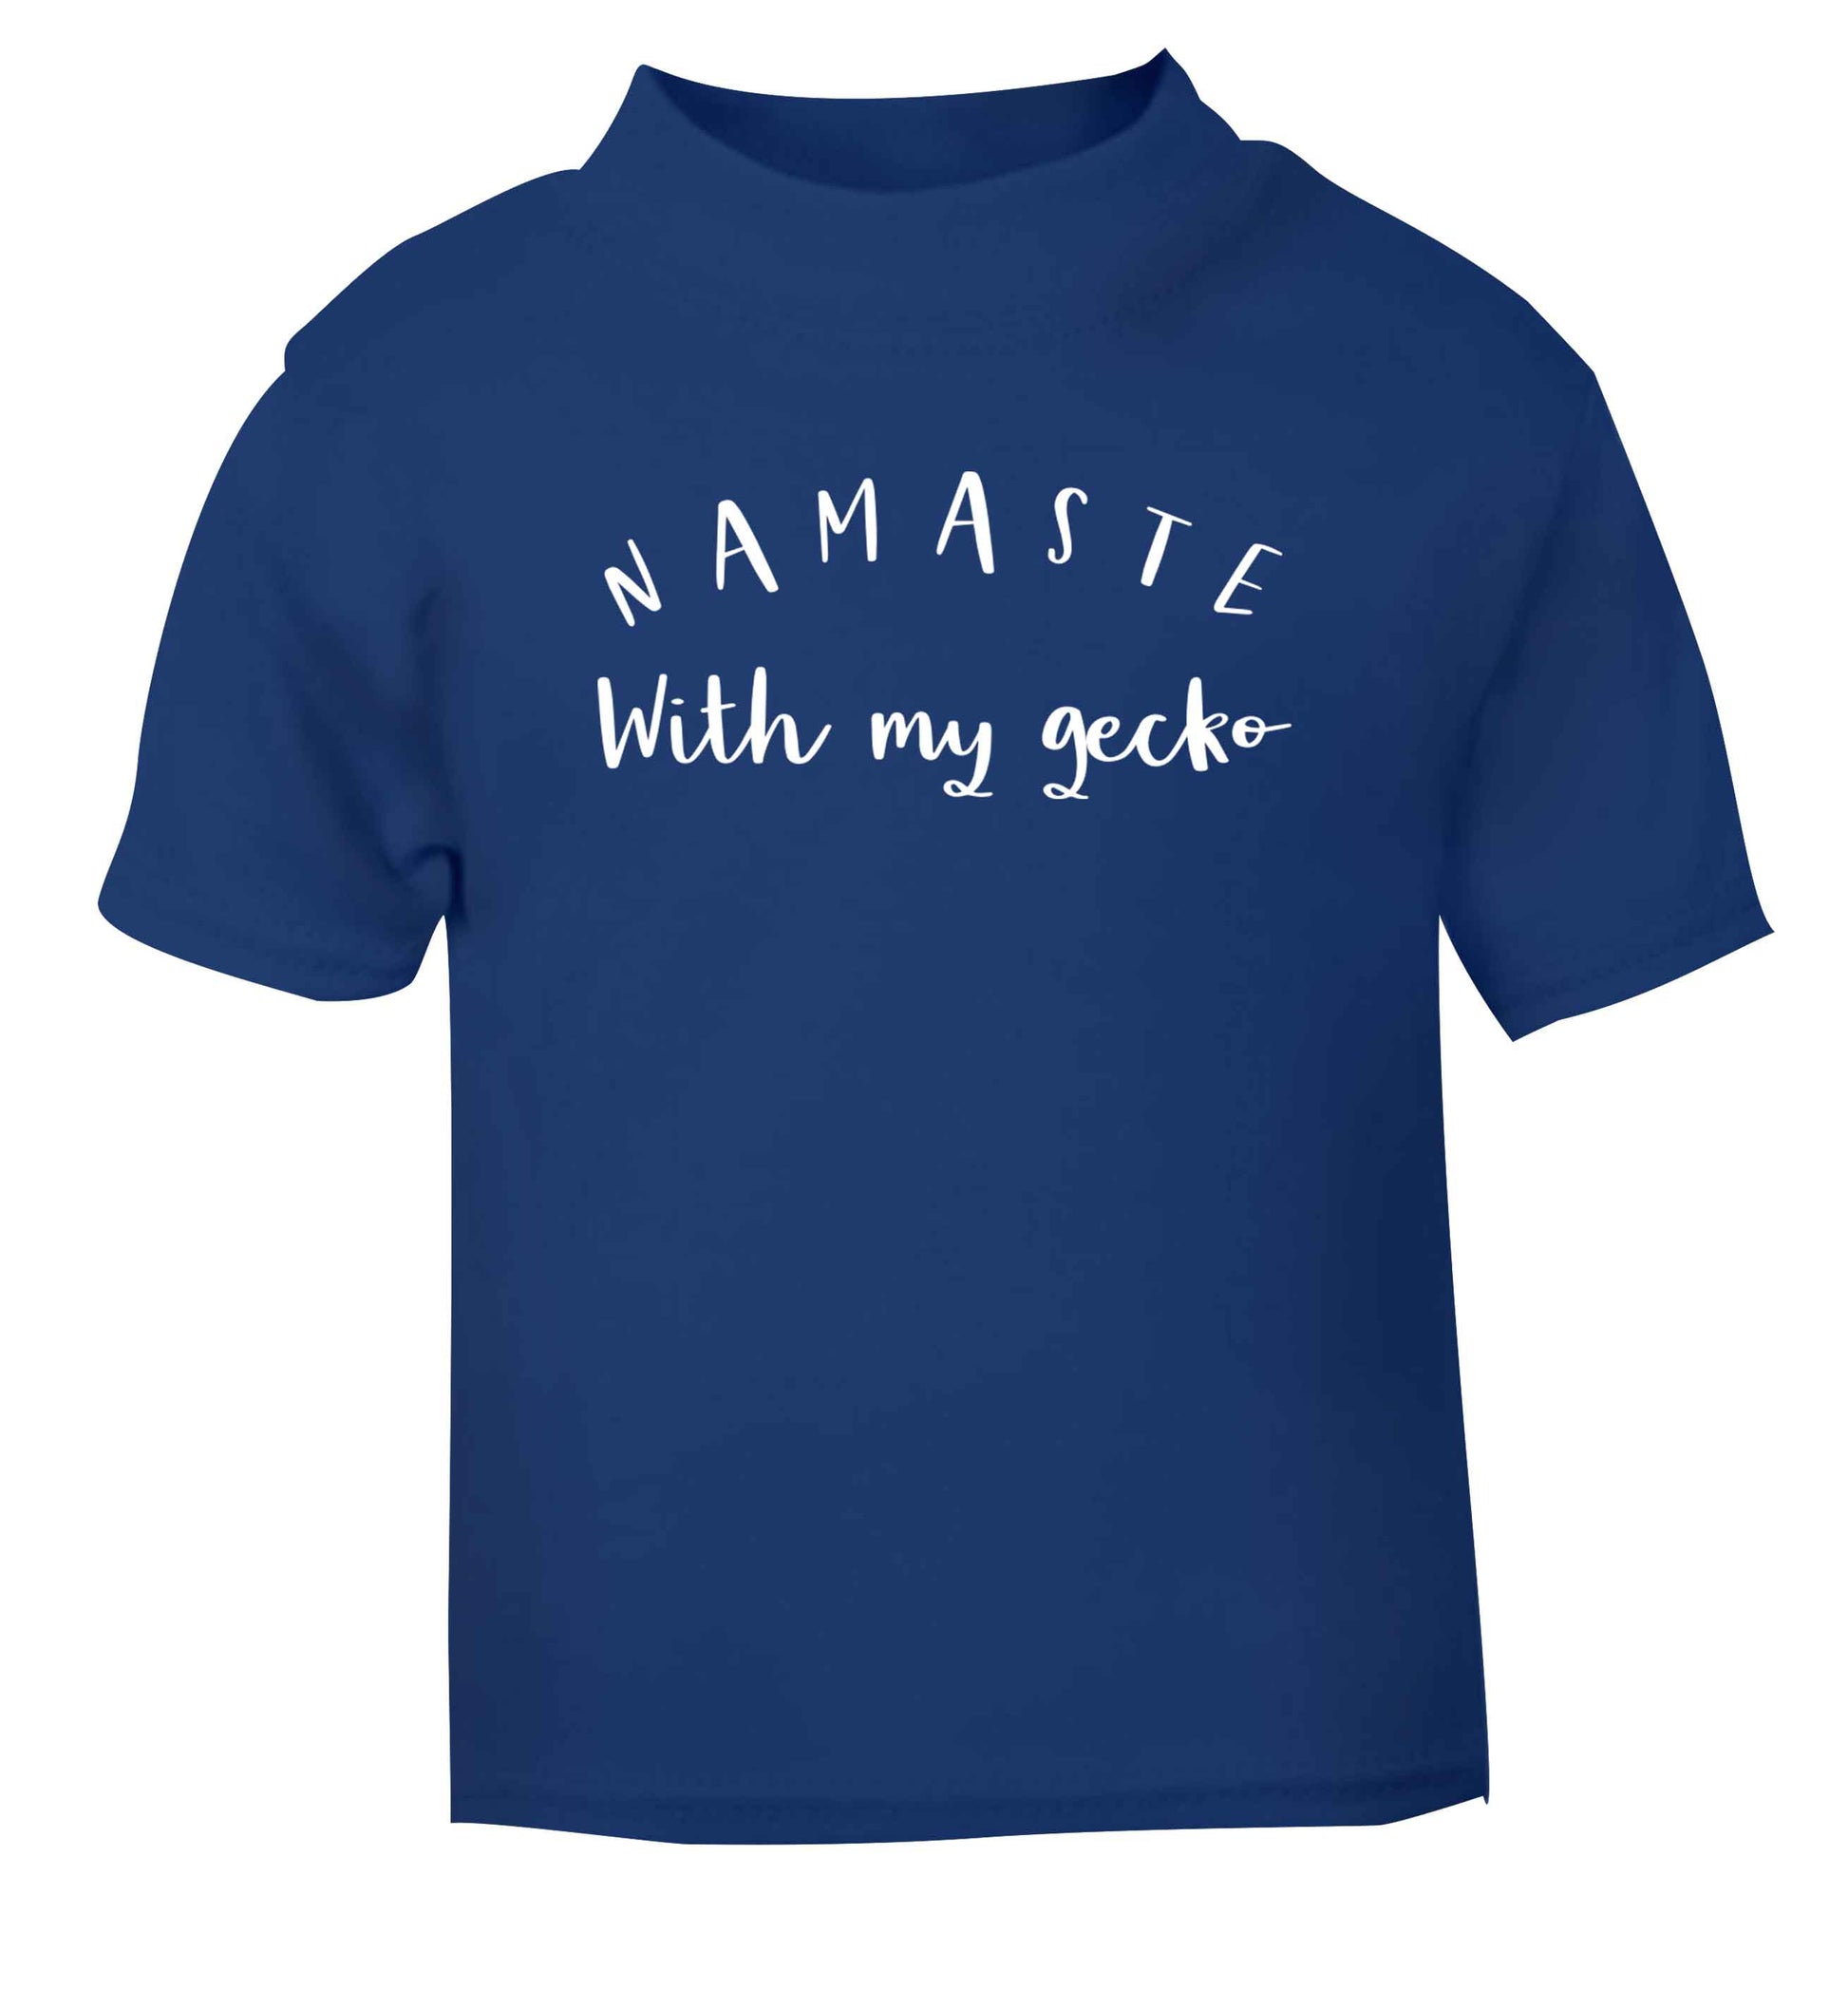 Namaste with my gecko blue Baby Toddler Tshirt 2 Years